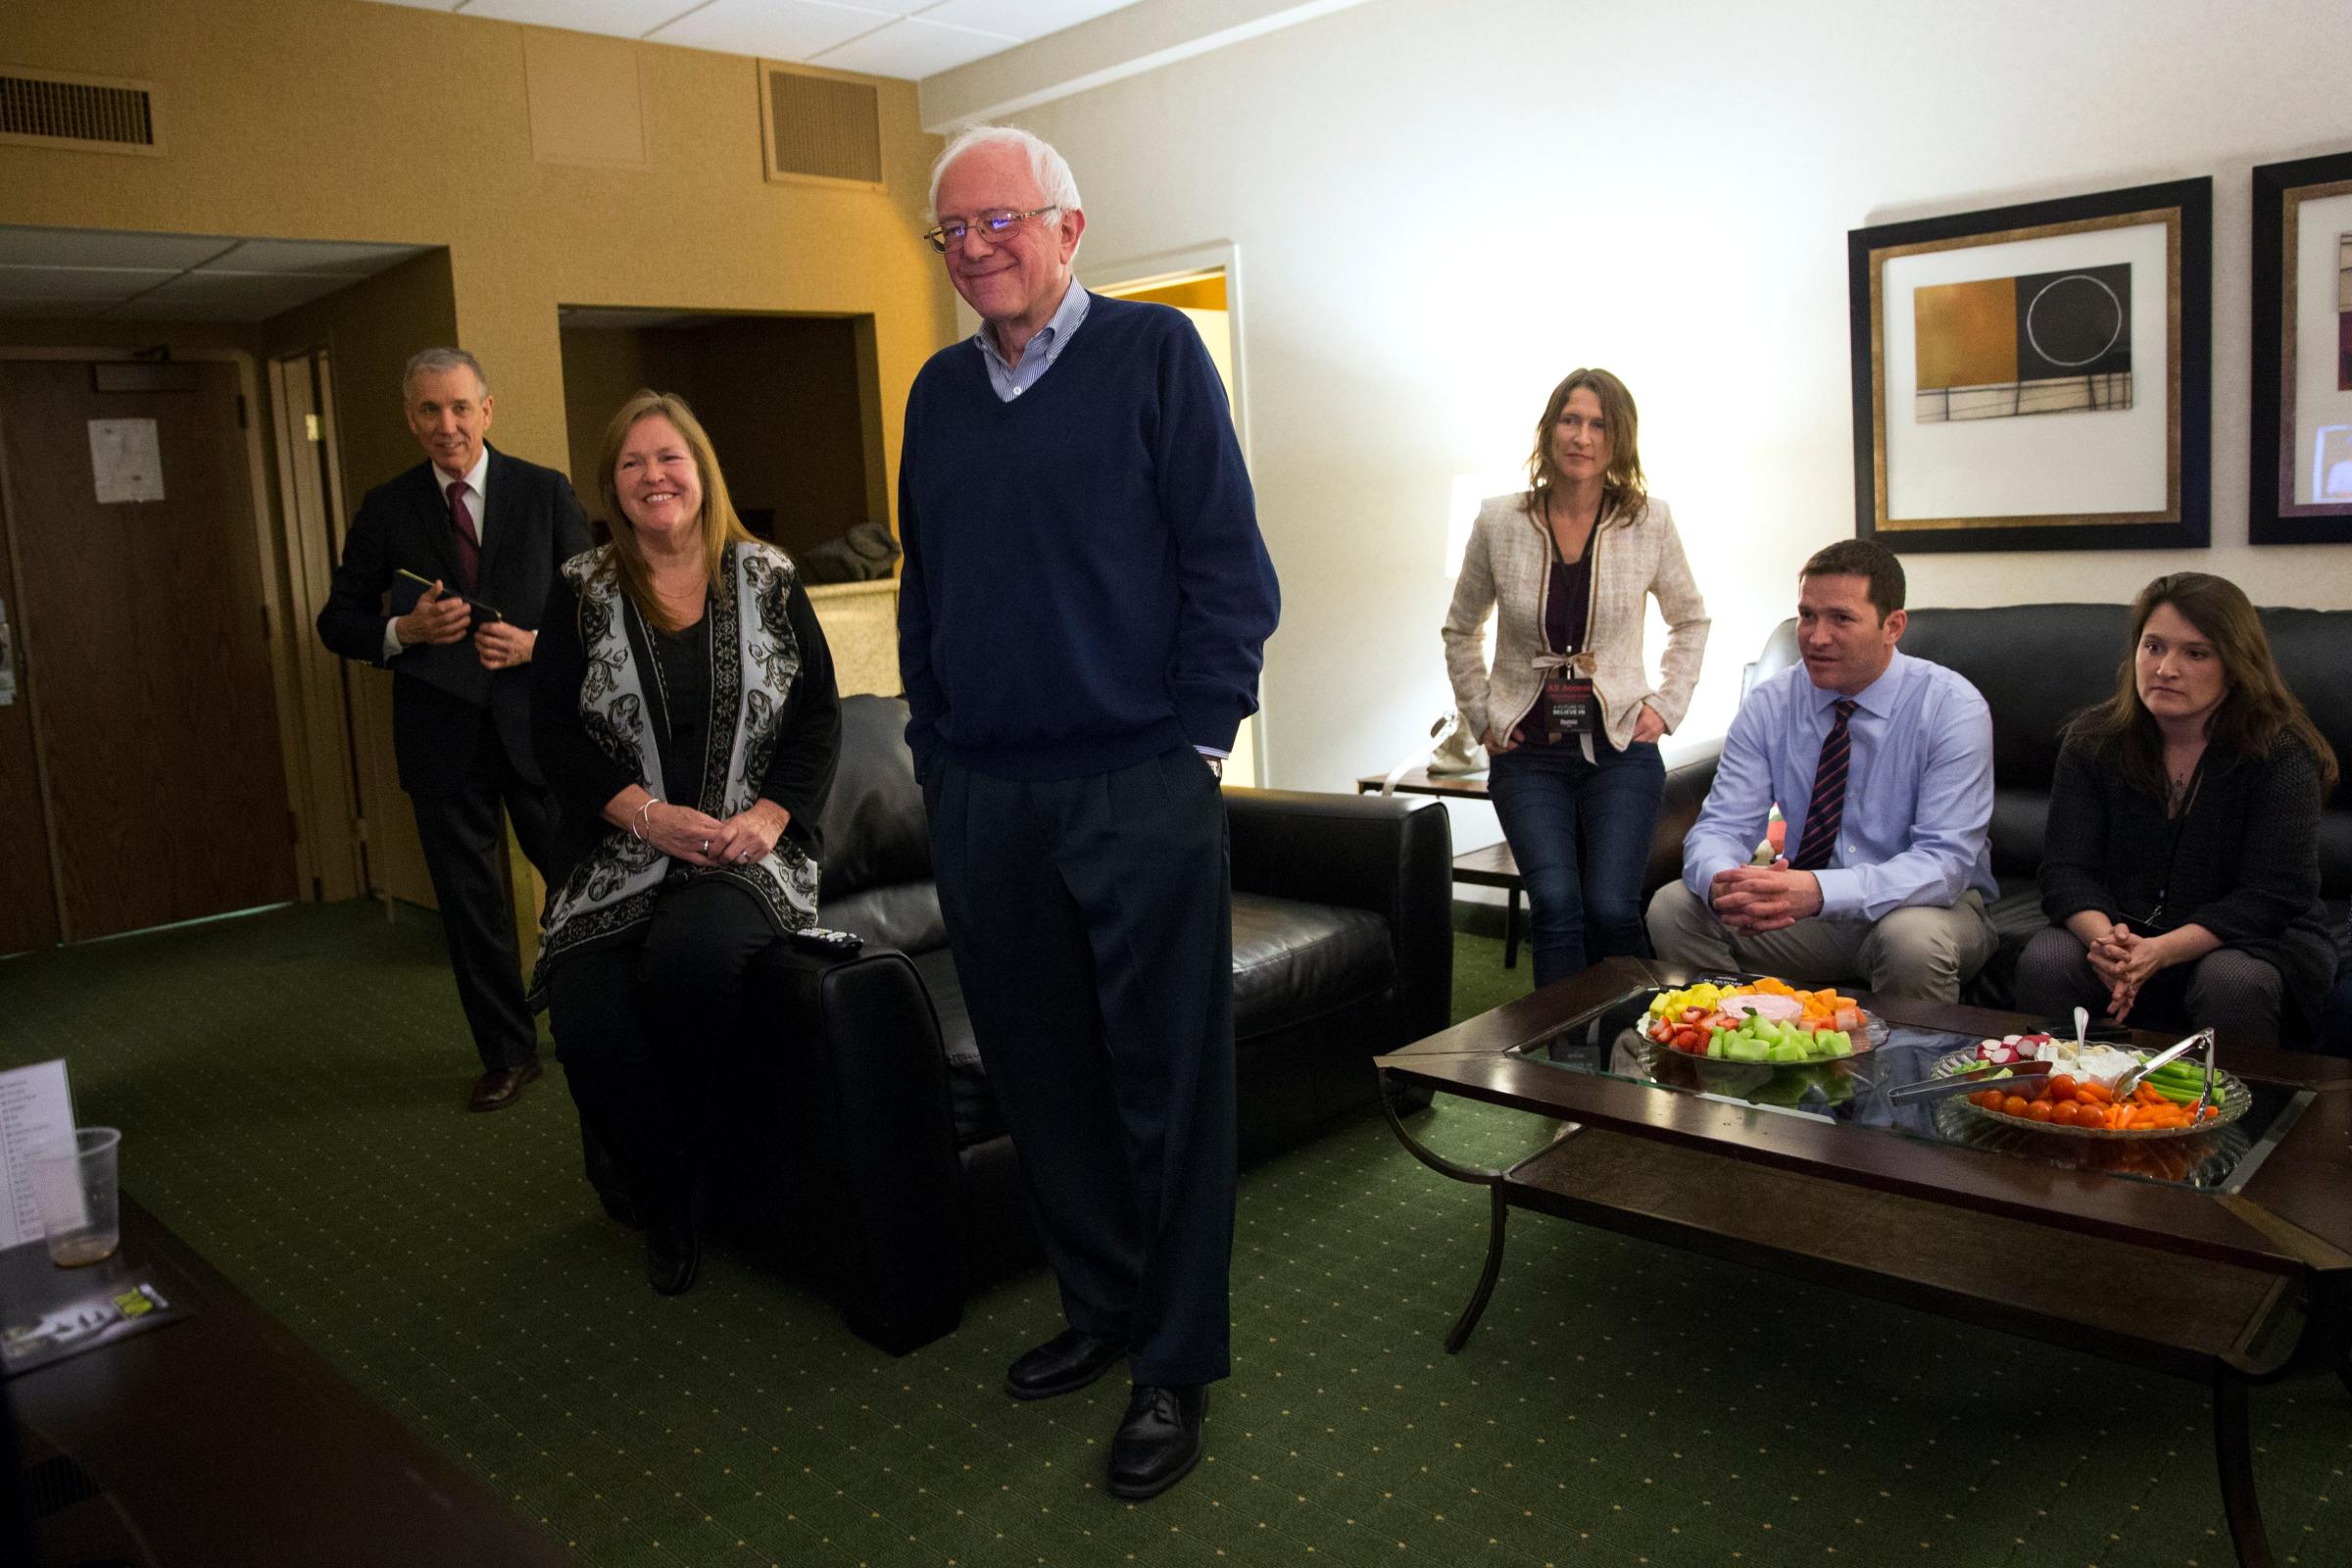 Democratic presidential candidate Sen. Bernie Sanders, I-Vt., watches caucus returns in his hotel room, on Feb. 1, 2016 in Des Moines, Iowa.